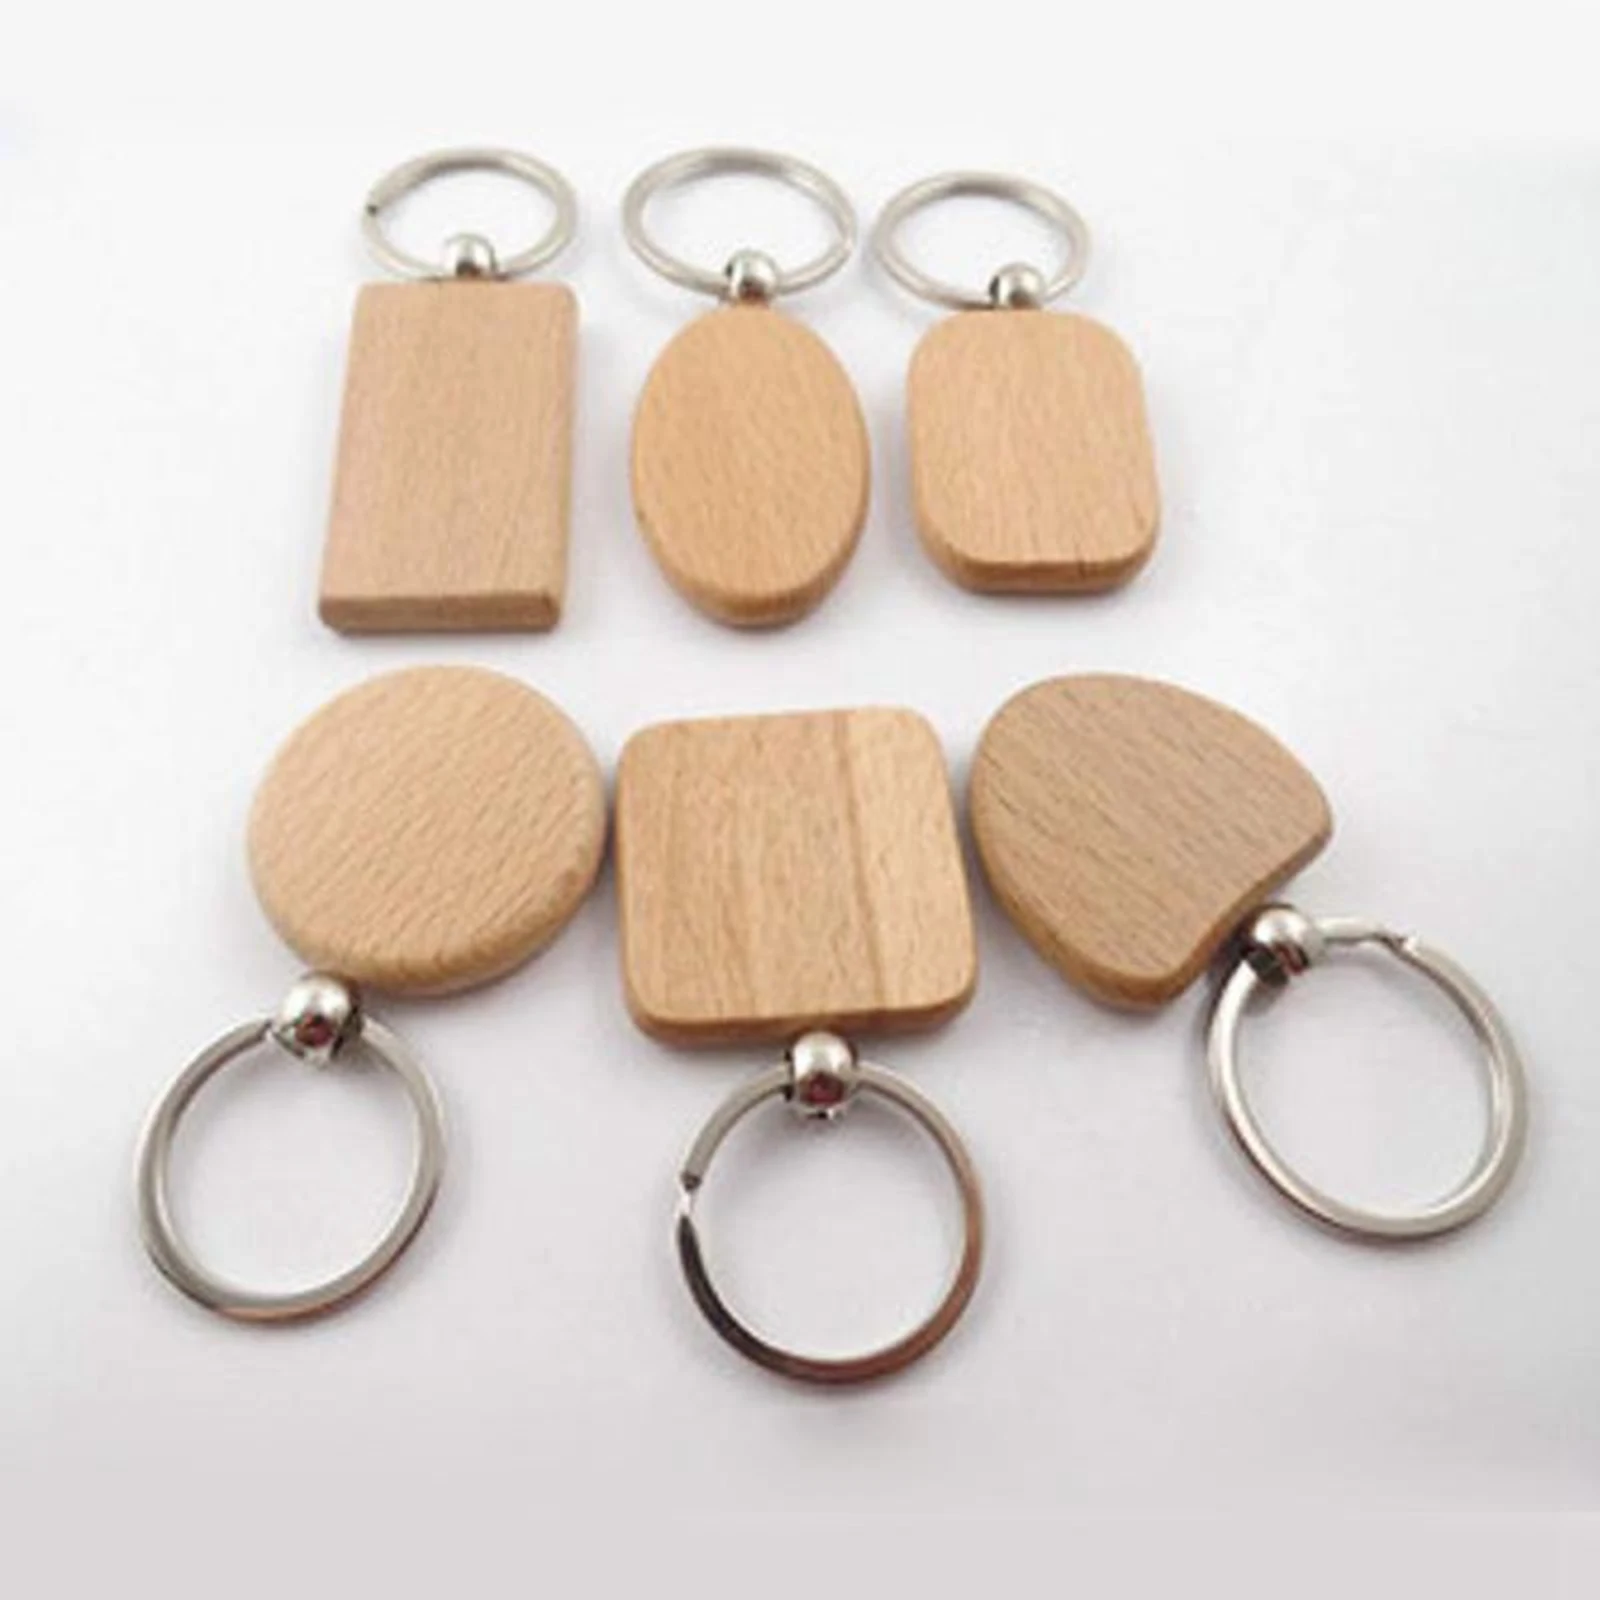 25x Unfinished Blank Wooden Key Chain Keychain Bag Charm Pendant Craft 